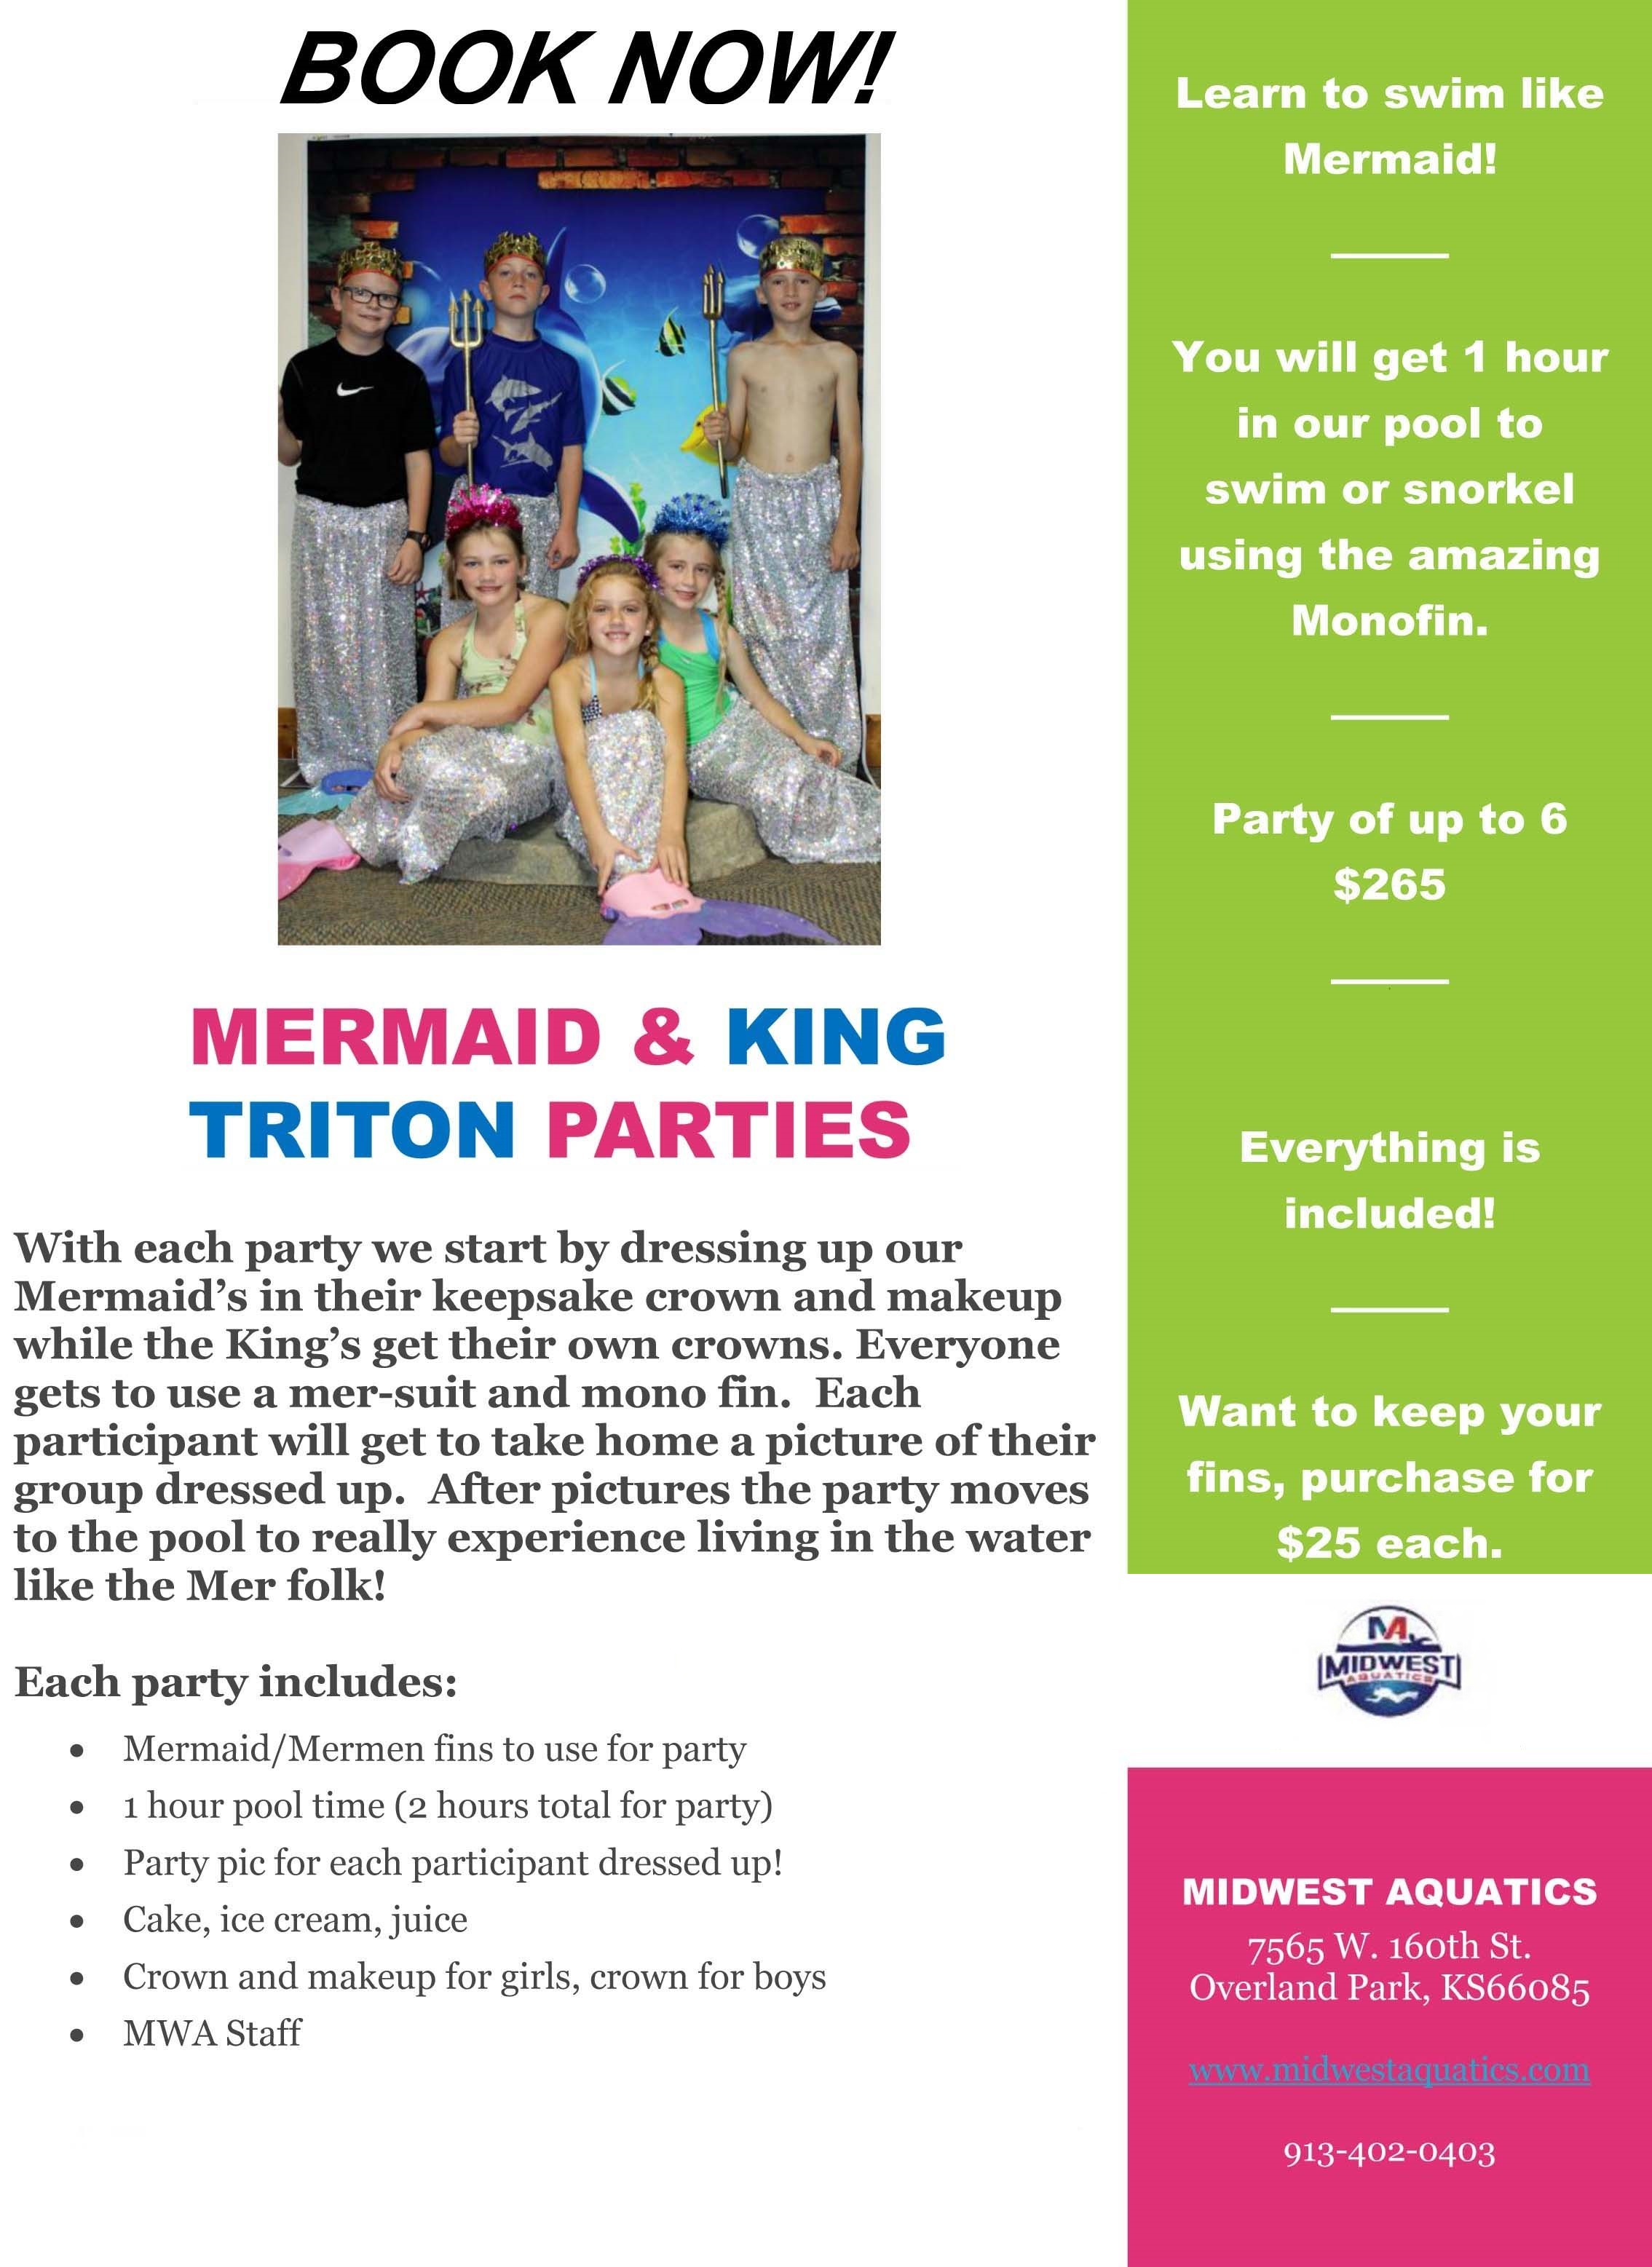 Mermaid and King Triton Party Flier